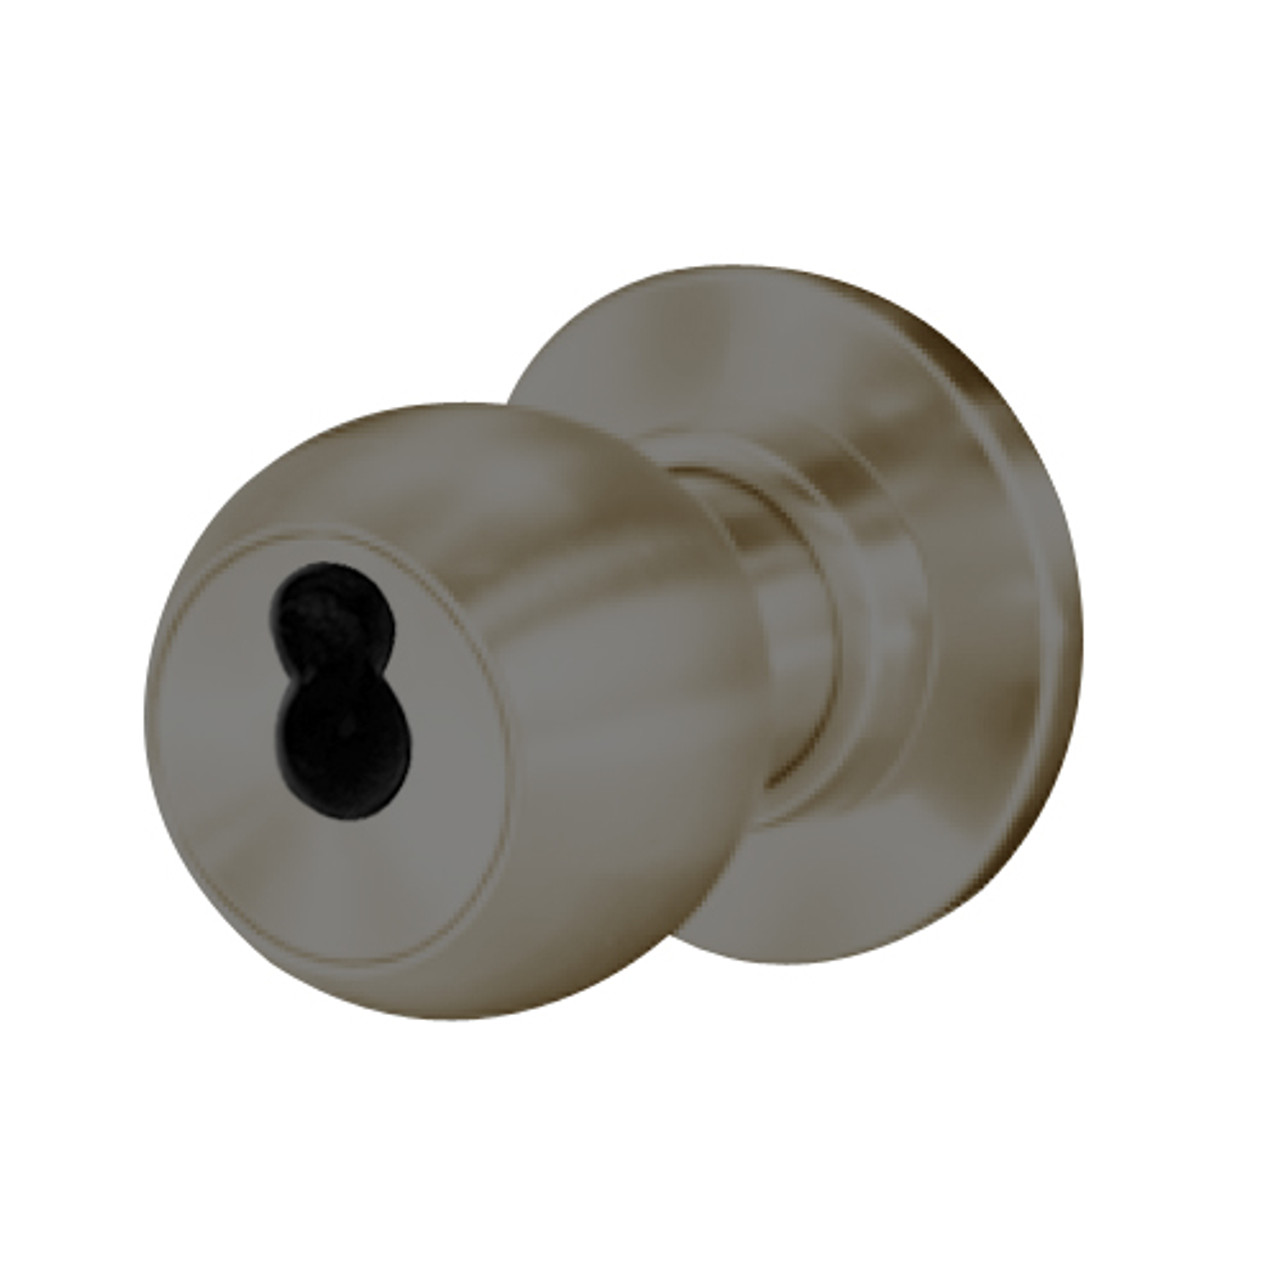 8K57YD4CSTK613 Best 8K Series Exit Heavy Duty Cylindrical Knob Locks with Round Style in Oil Rubbed Bronze